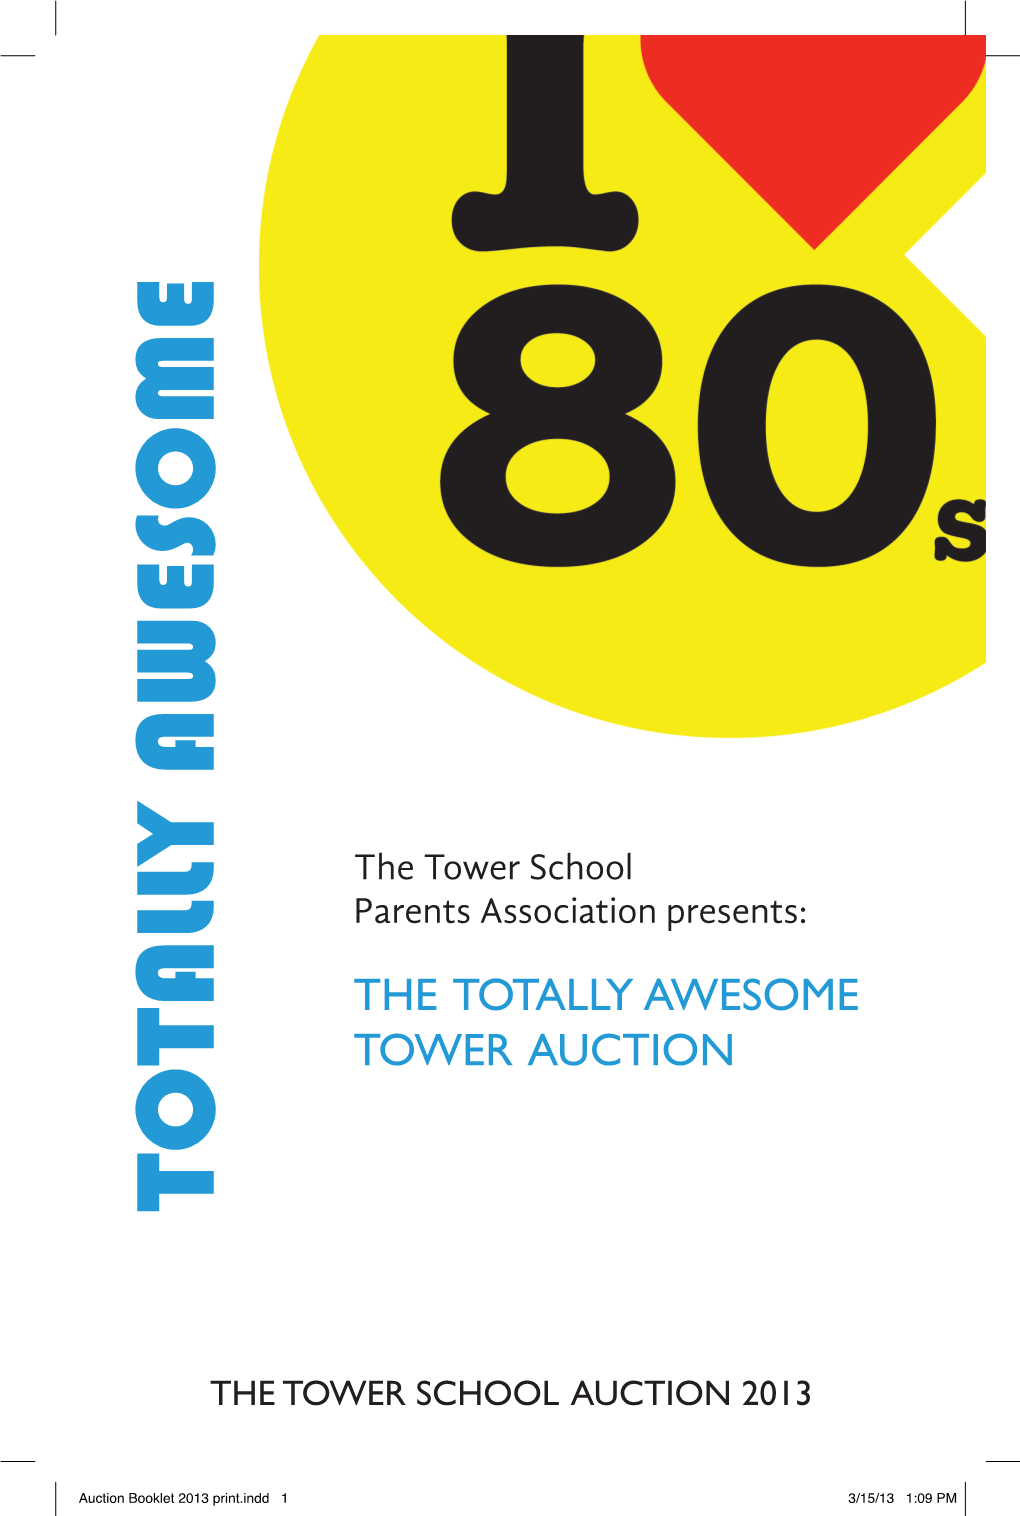 The Totally Awesome Tower Auction